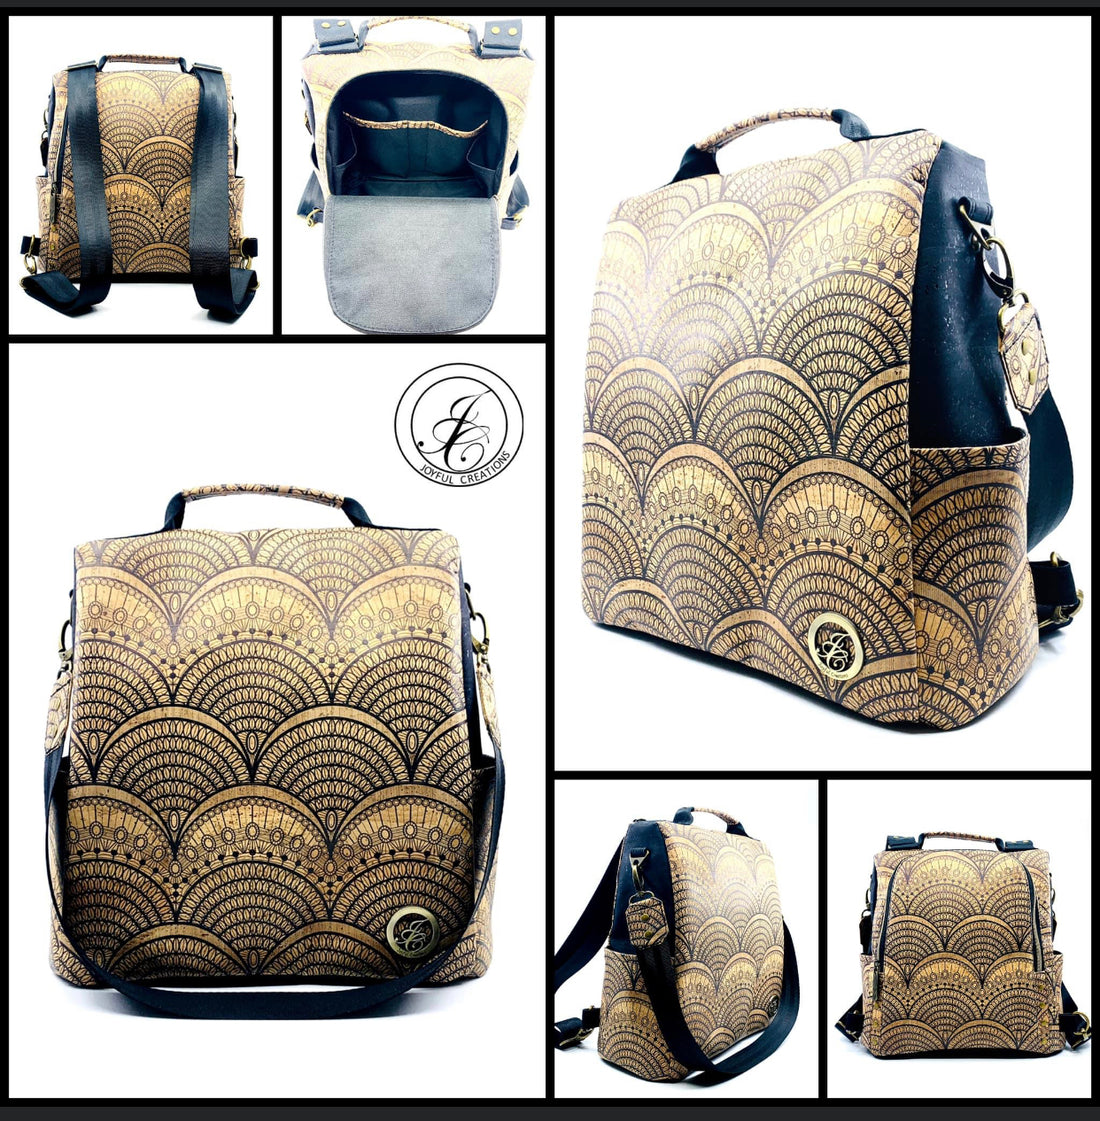 Design pattern backpack - clothing & accessories - by owner